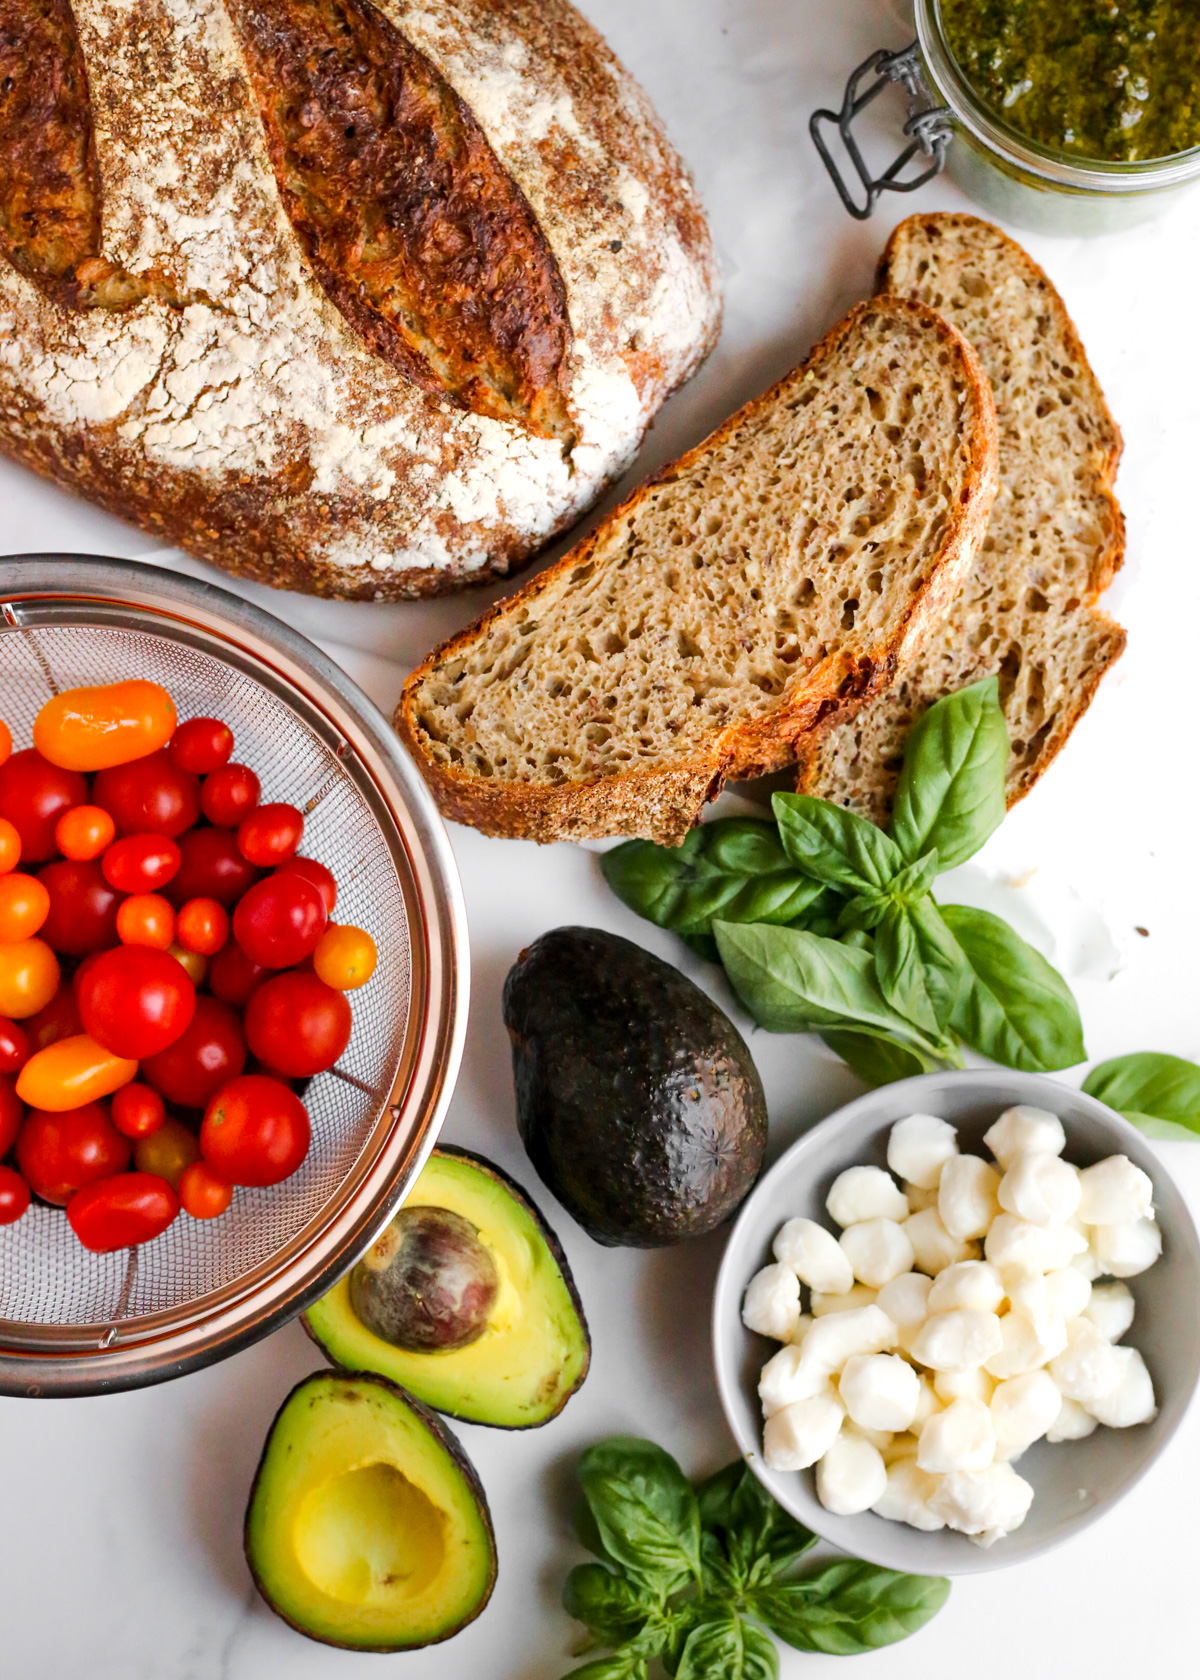 Overhead view of the ingredients needed to make cparese avocado toast, including thick slices of multigrain bread, pesto sauce in a glass jar, cherry tomatoes, a ripe avocado, mozzarella cheese, and fresh basil